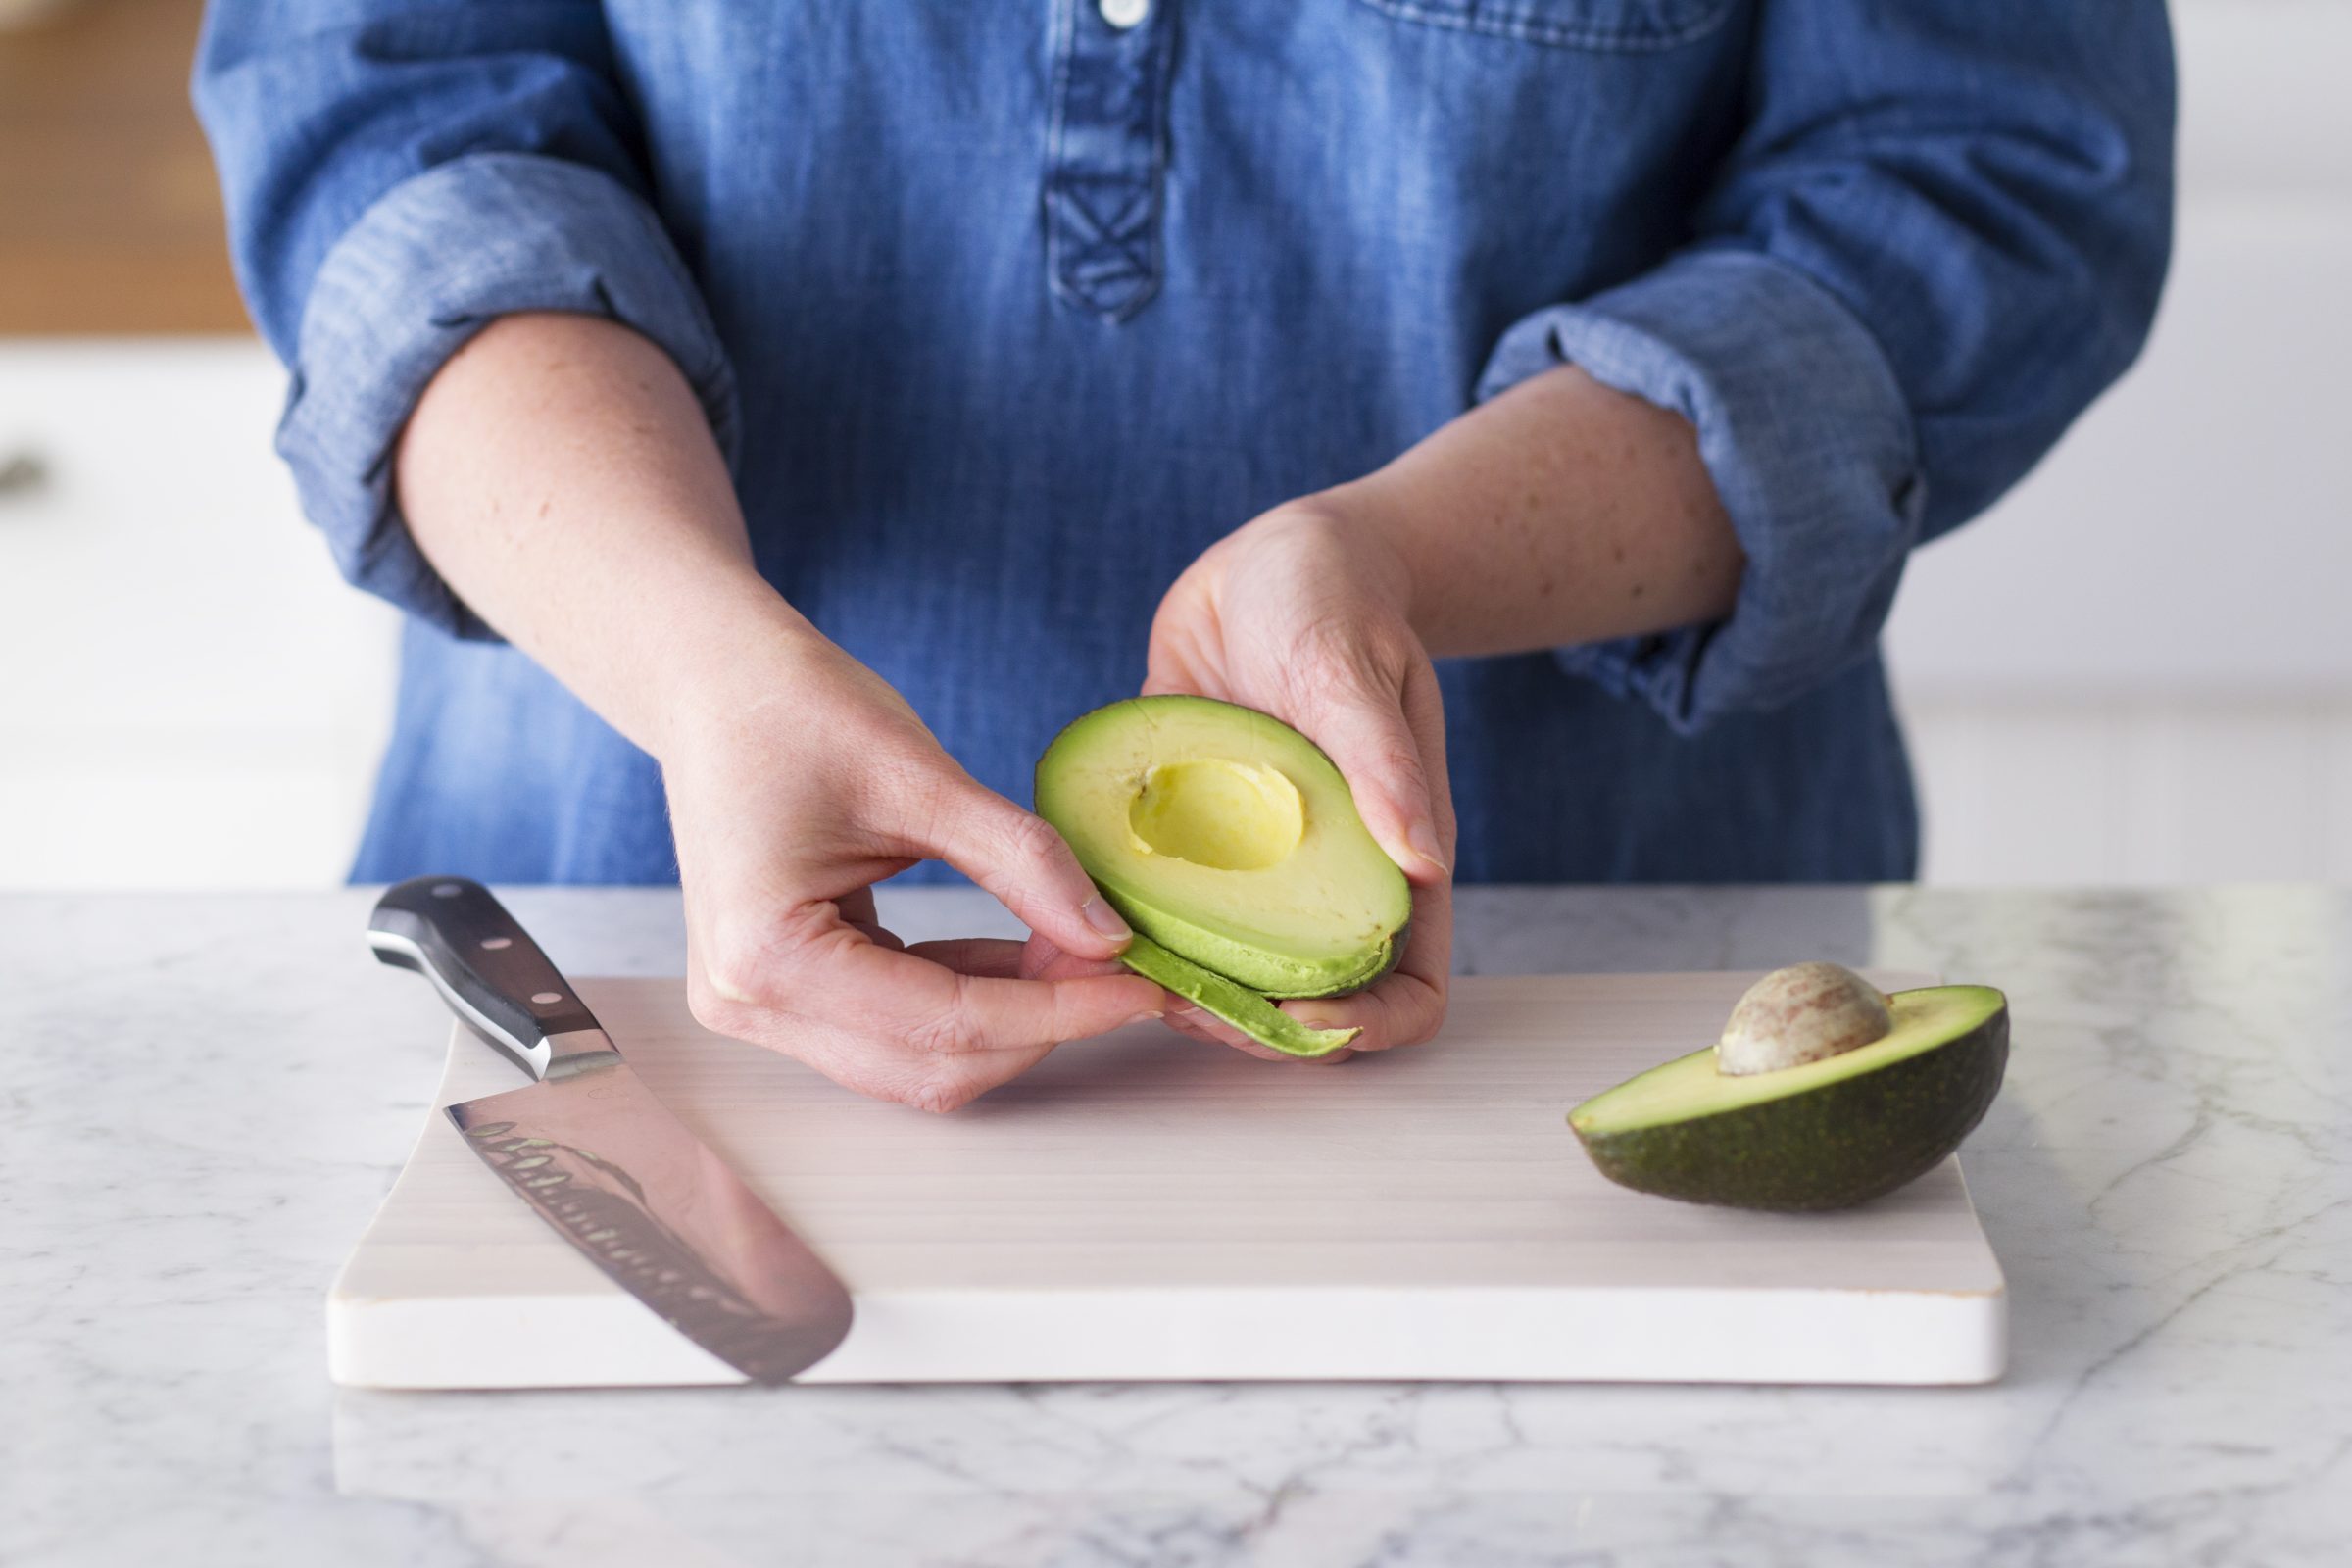 Person peeling the skin off an avocado that is sliced in half over a cutting board